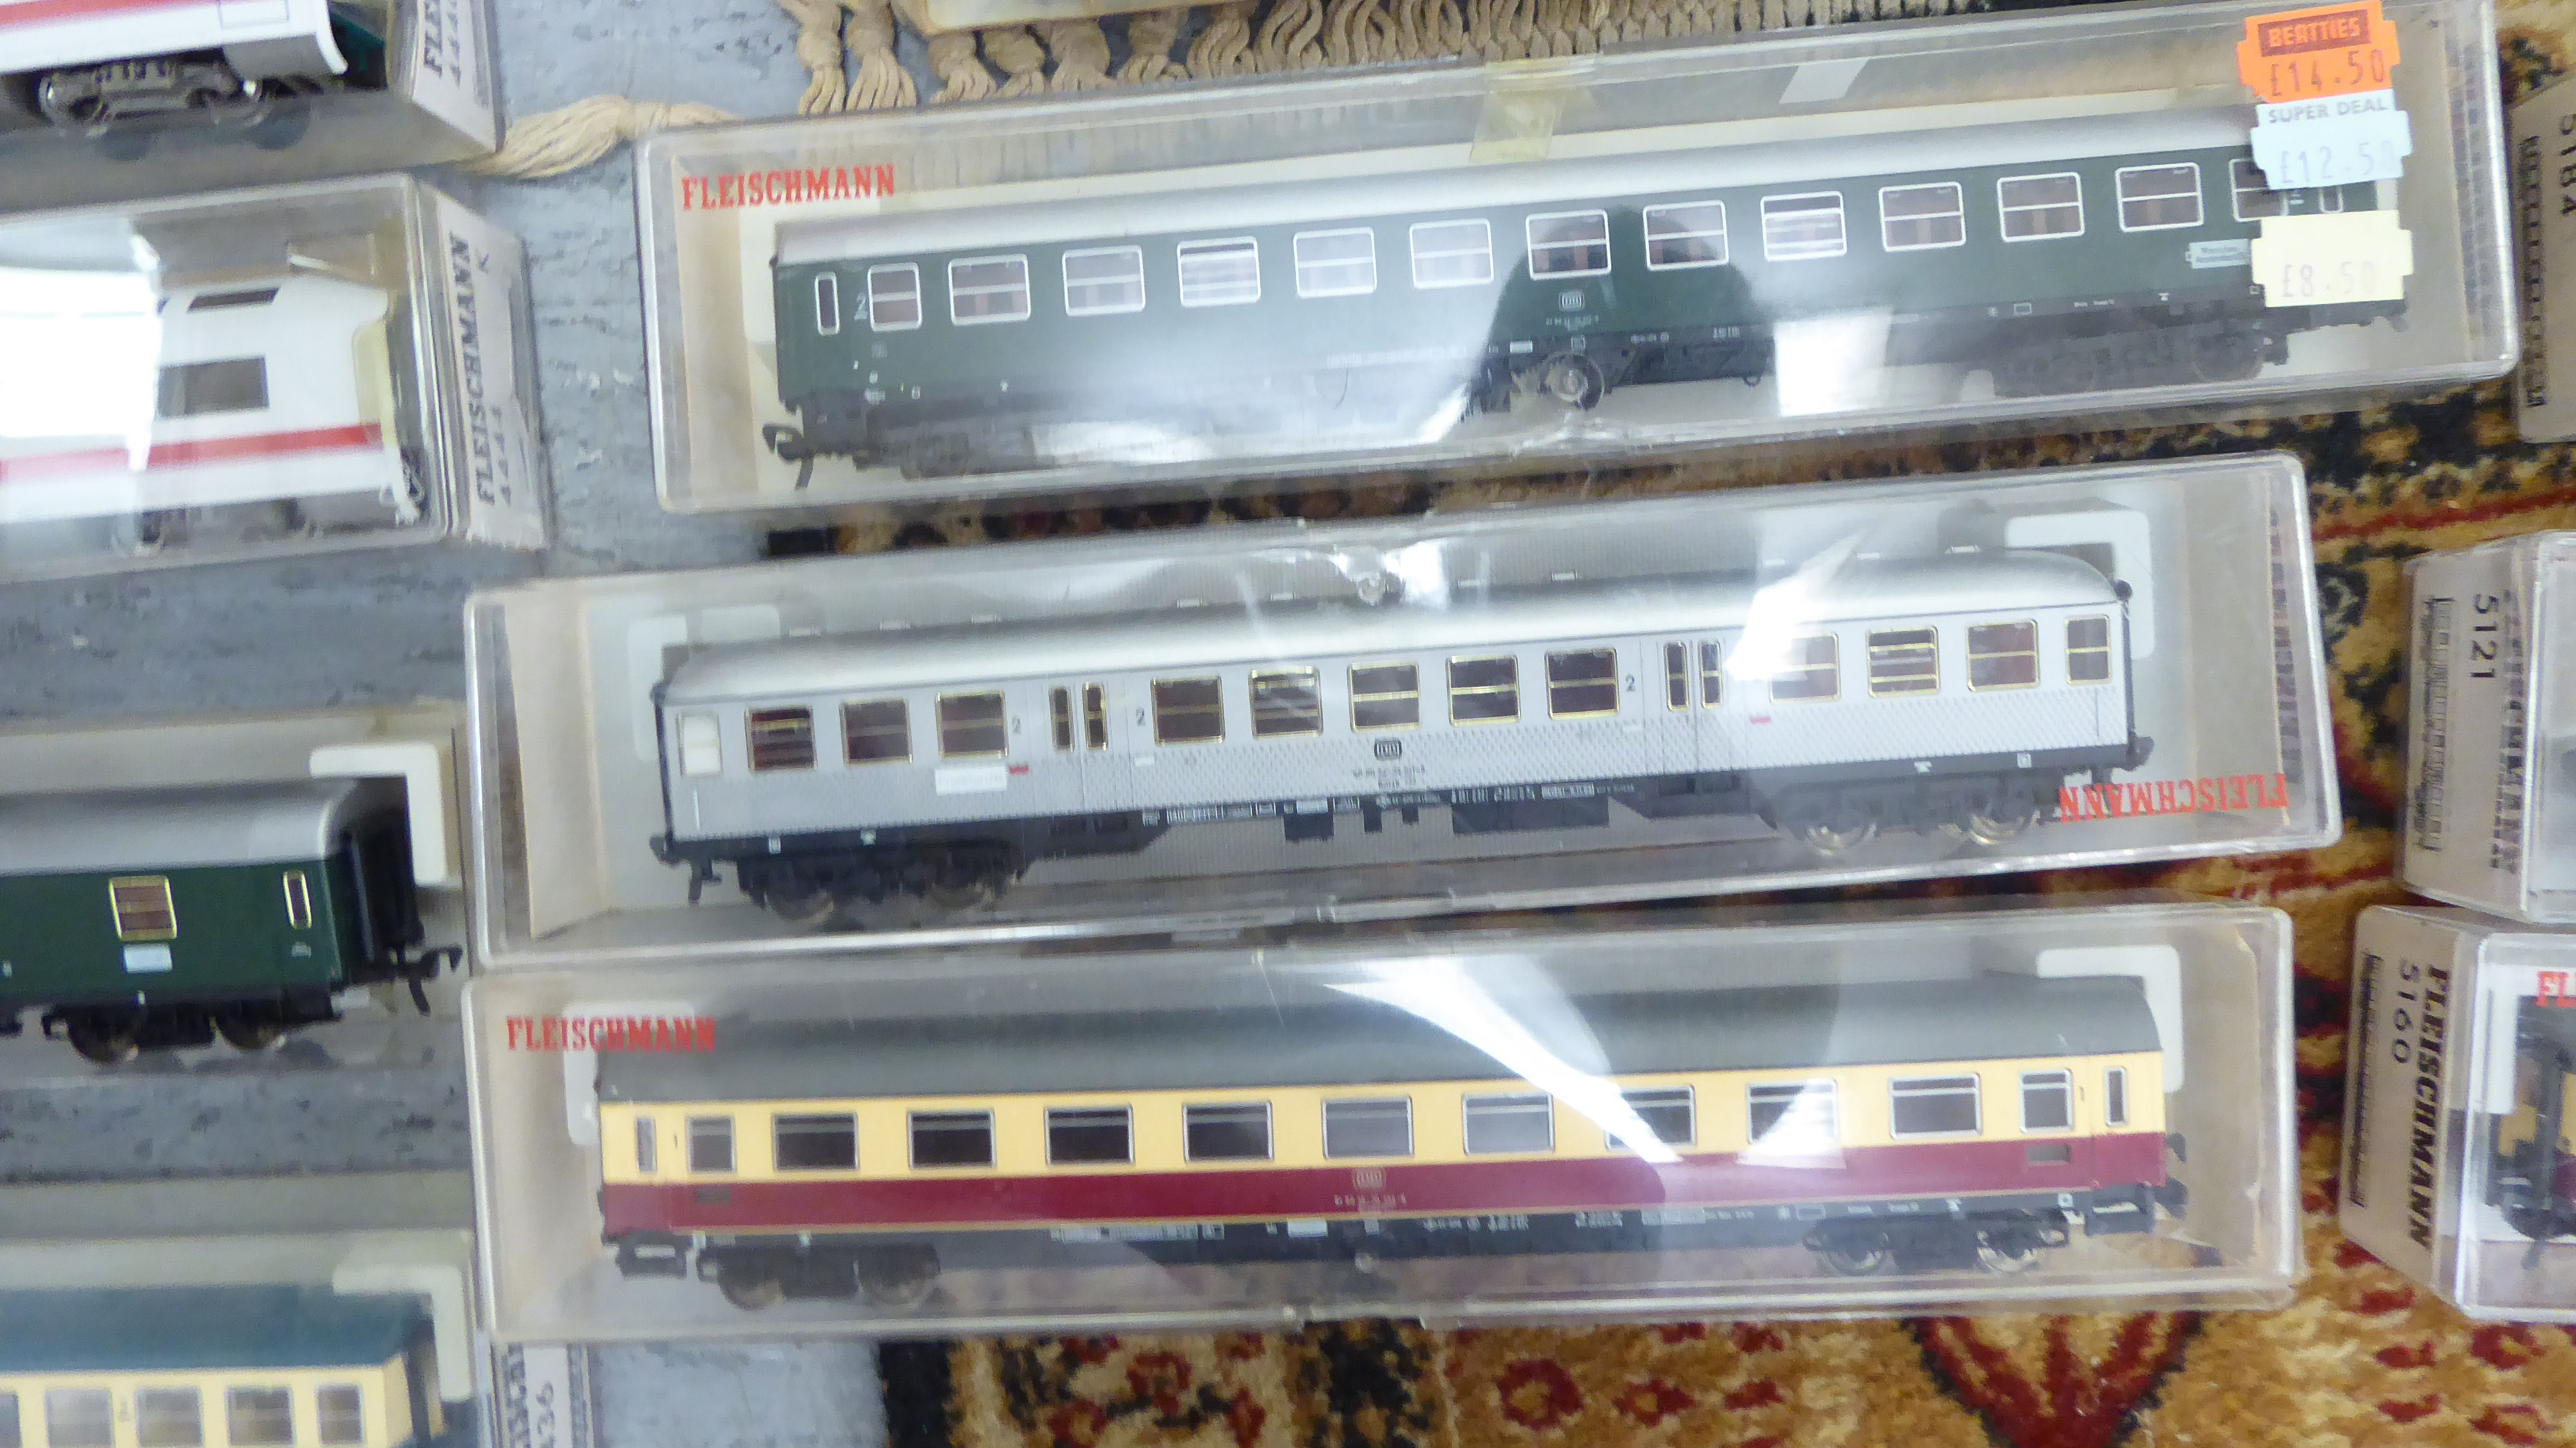 Fleischmann HO gauge model railway accessories: to include an Intercity Express and various coaches - Image 5 of 8